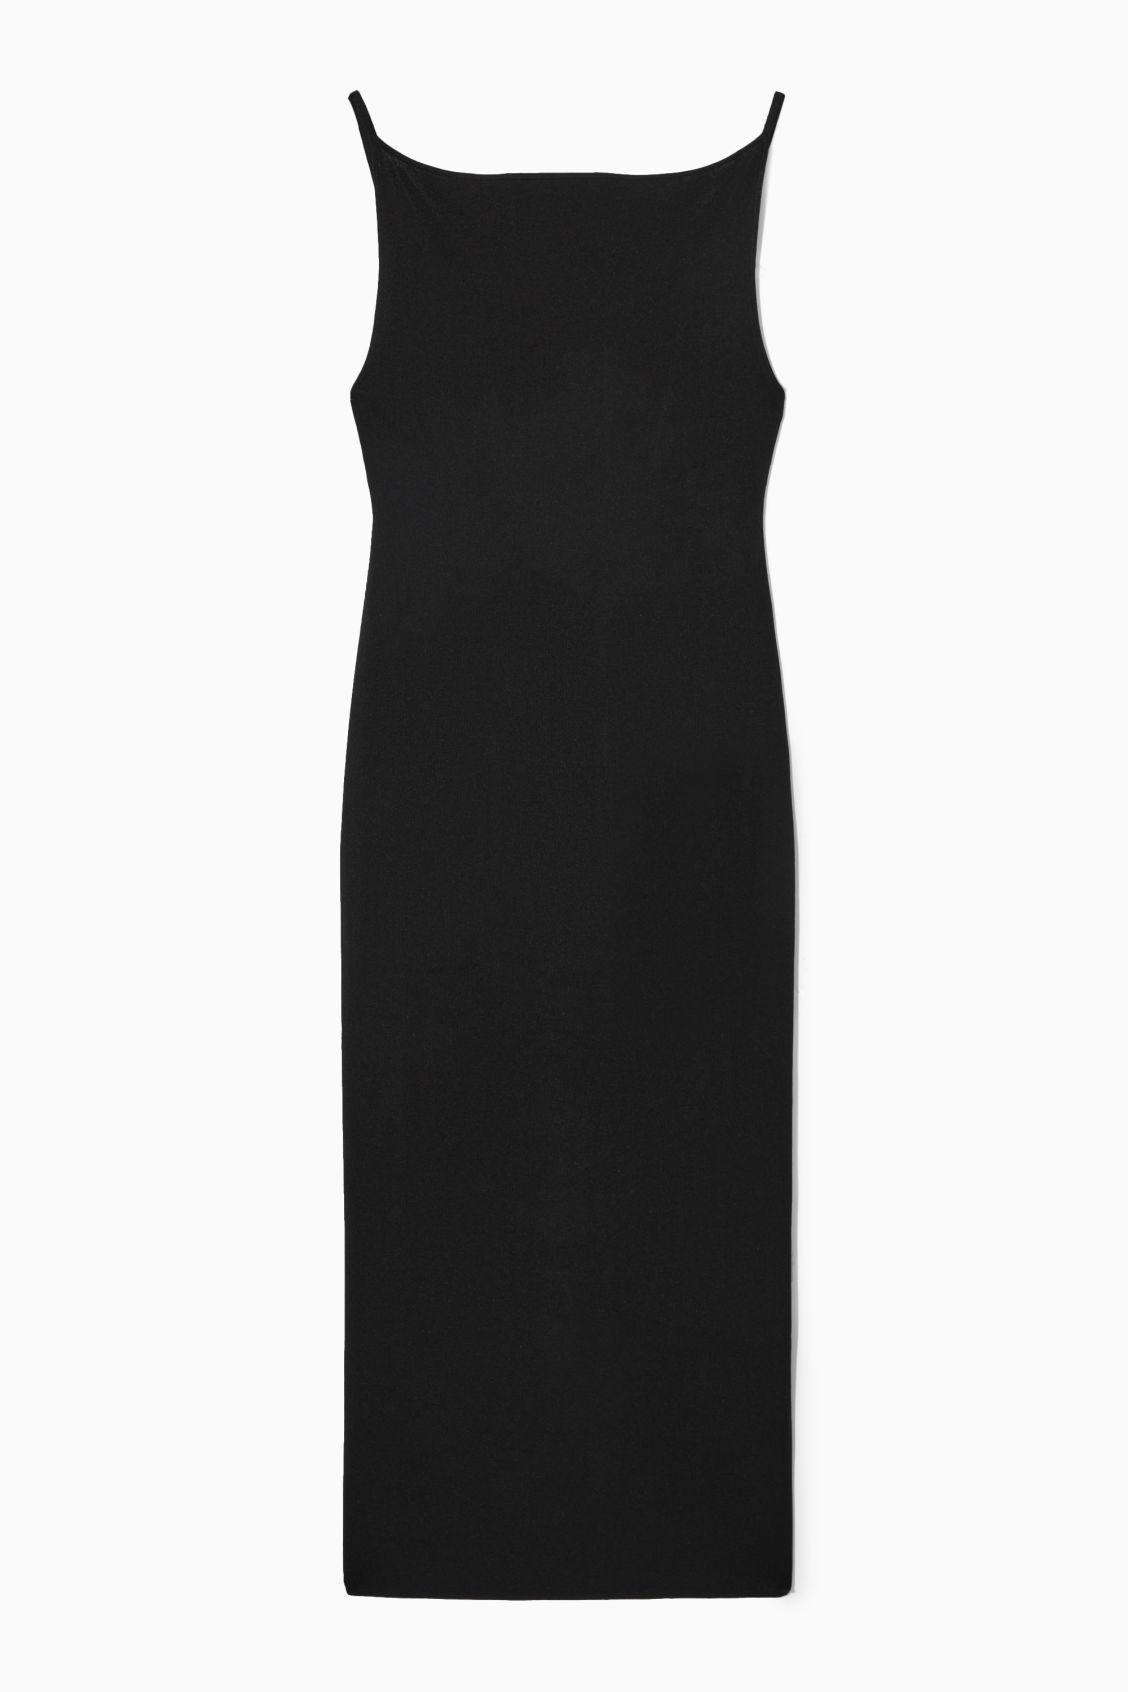 COS Square-neck Knitted Midi Slip Dress in Black | Lyst